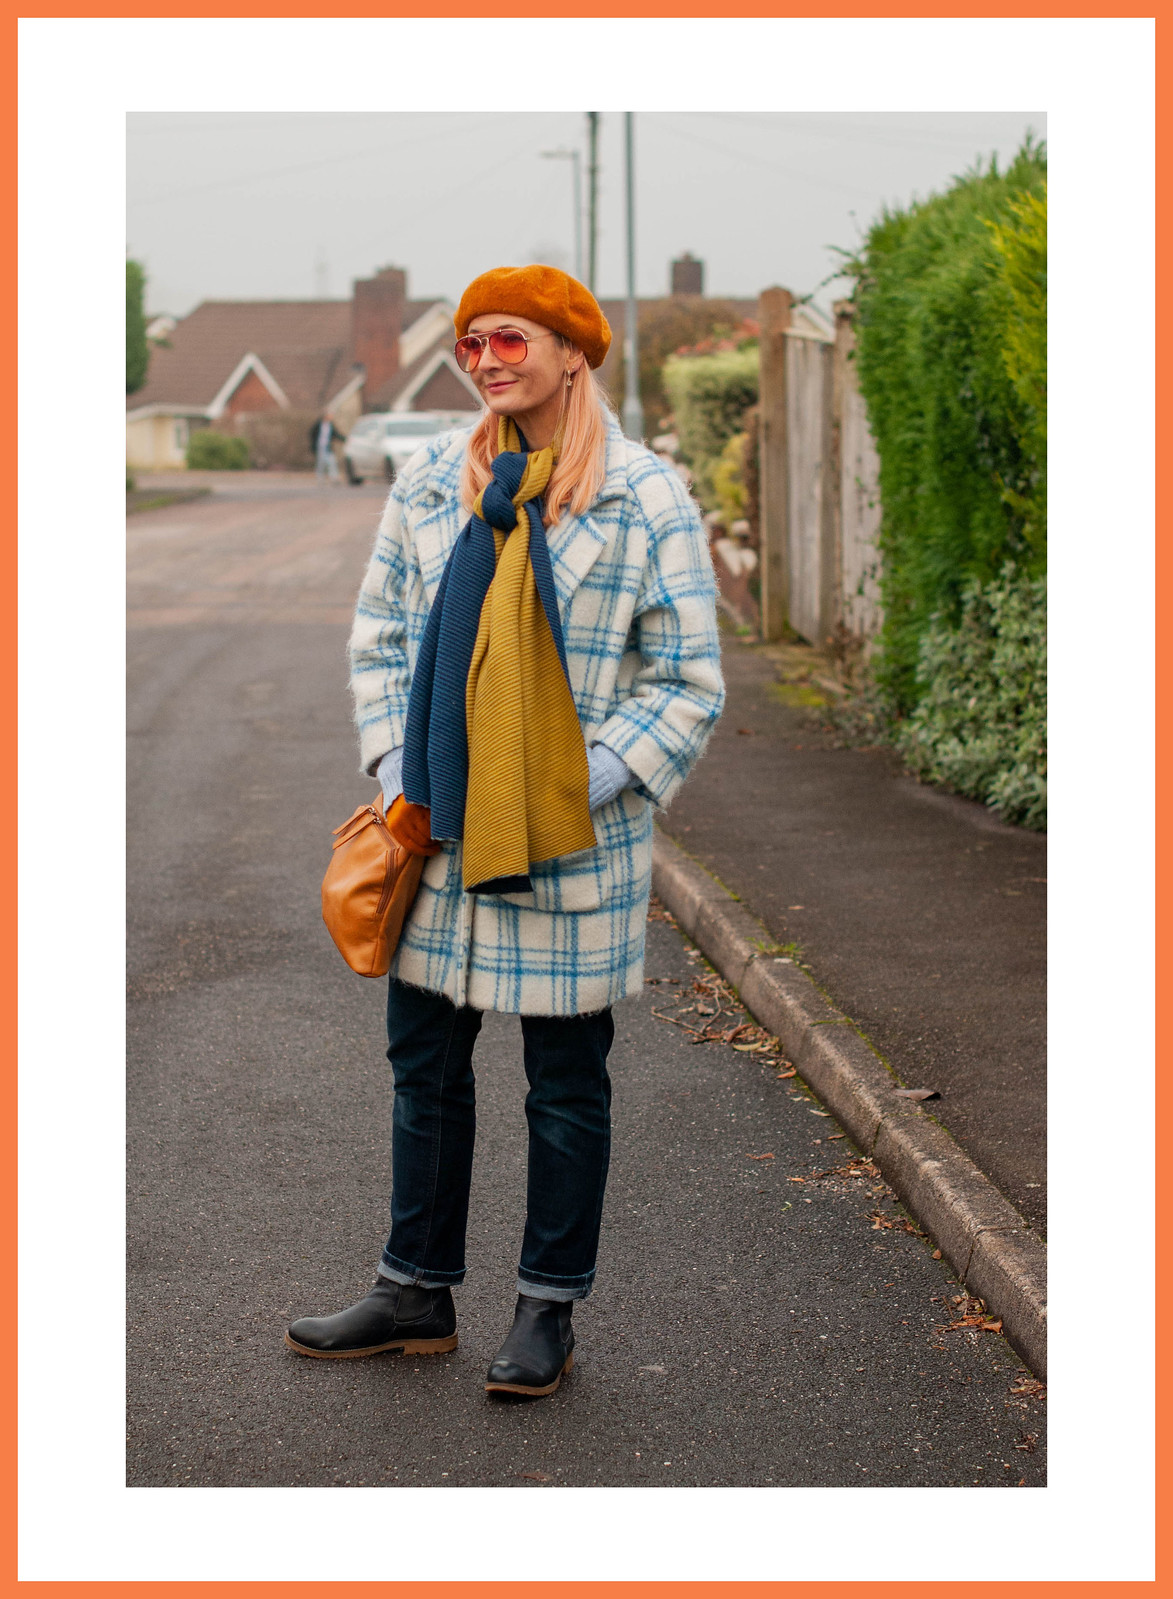 Hot Mess - Or More Coordinated Than I Thought? (Catherine Summers AKA Not Dressed As Lamb wearing blue/white checked cocoon coat, dark straight leg jeans, navy Chelsea boots, navy/ green woollen scarf, pumpkin orange beret and gloves, tan cross-body bag)